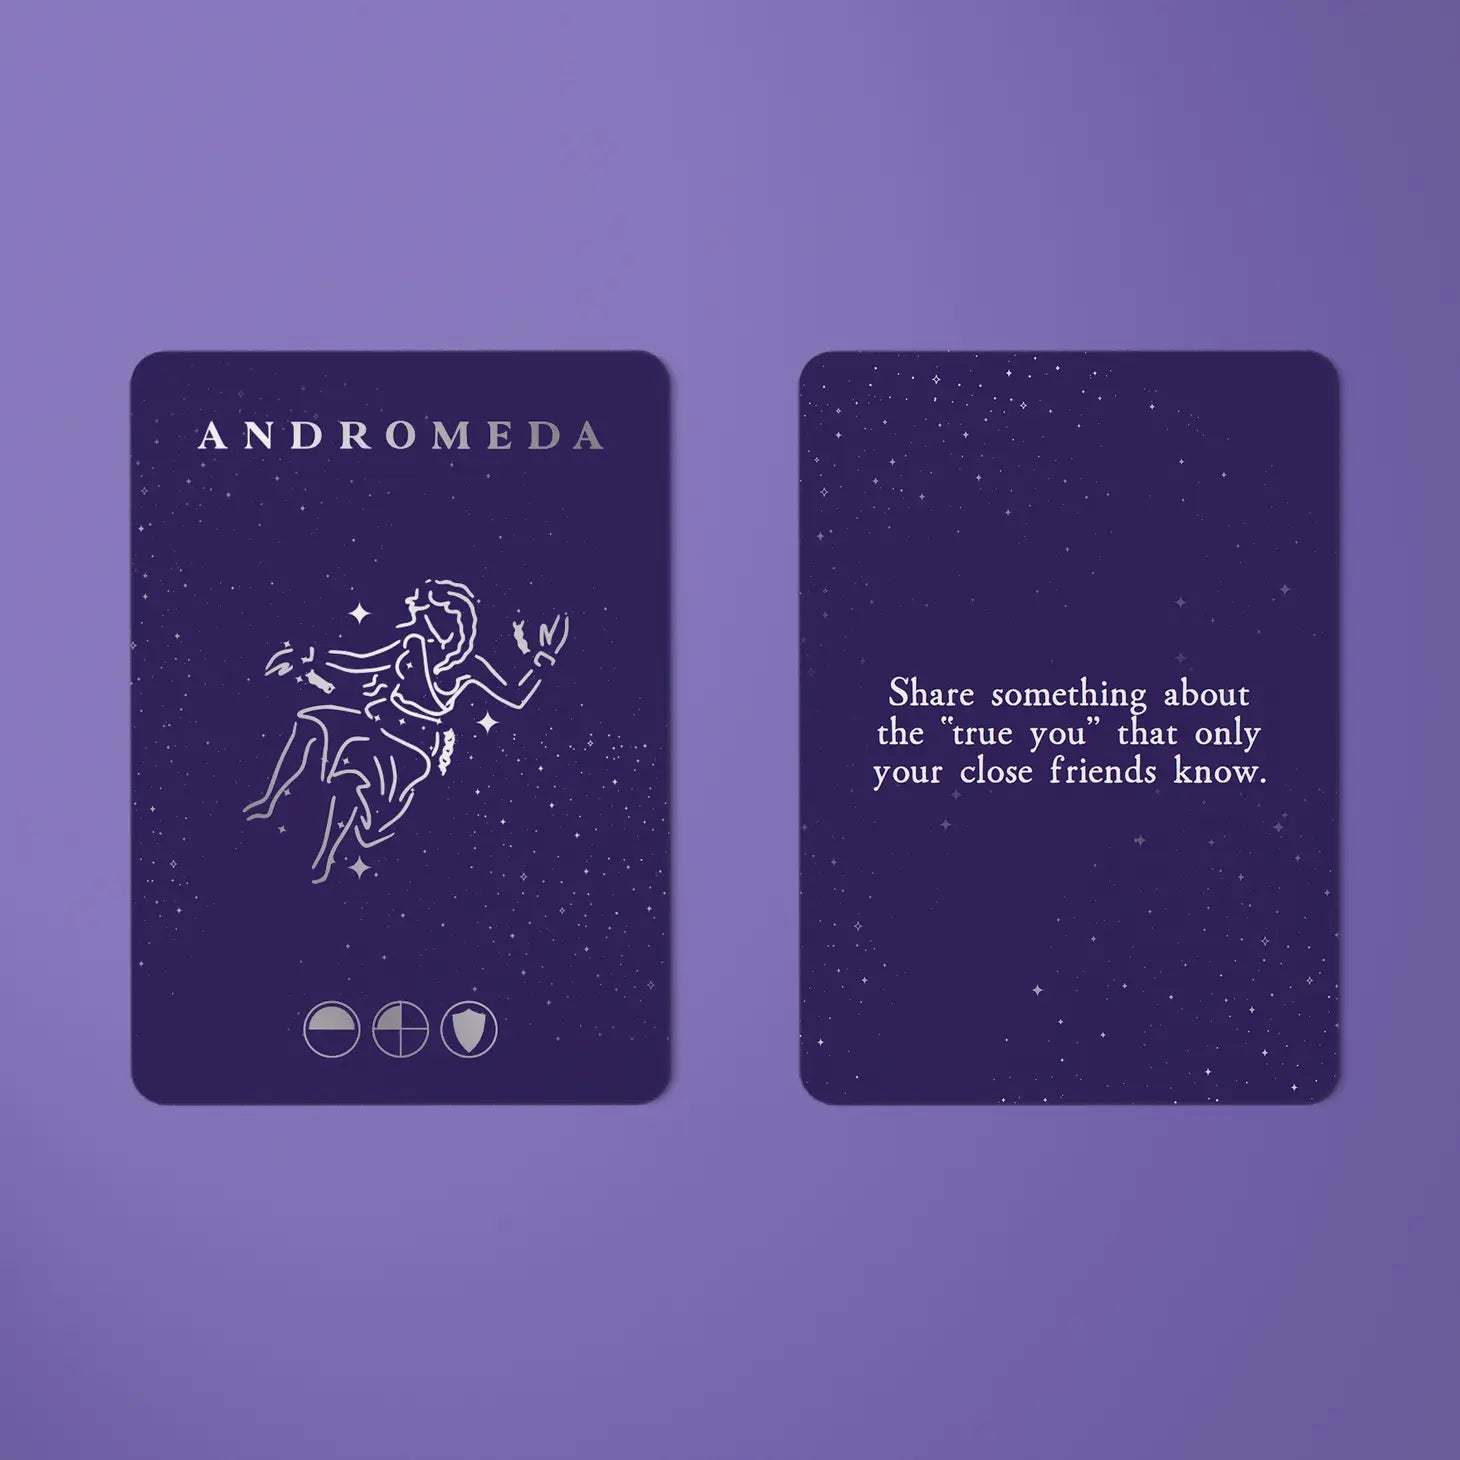 Sparks: A Conversation Card Game Inspired by the Stars